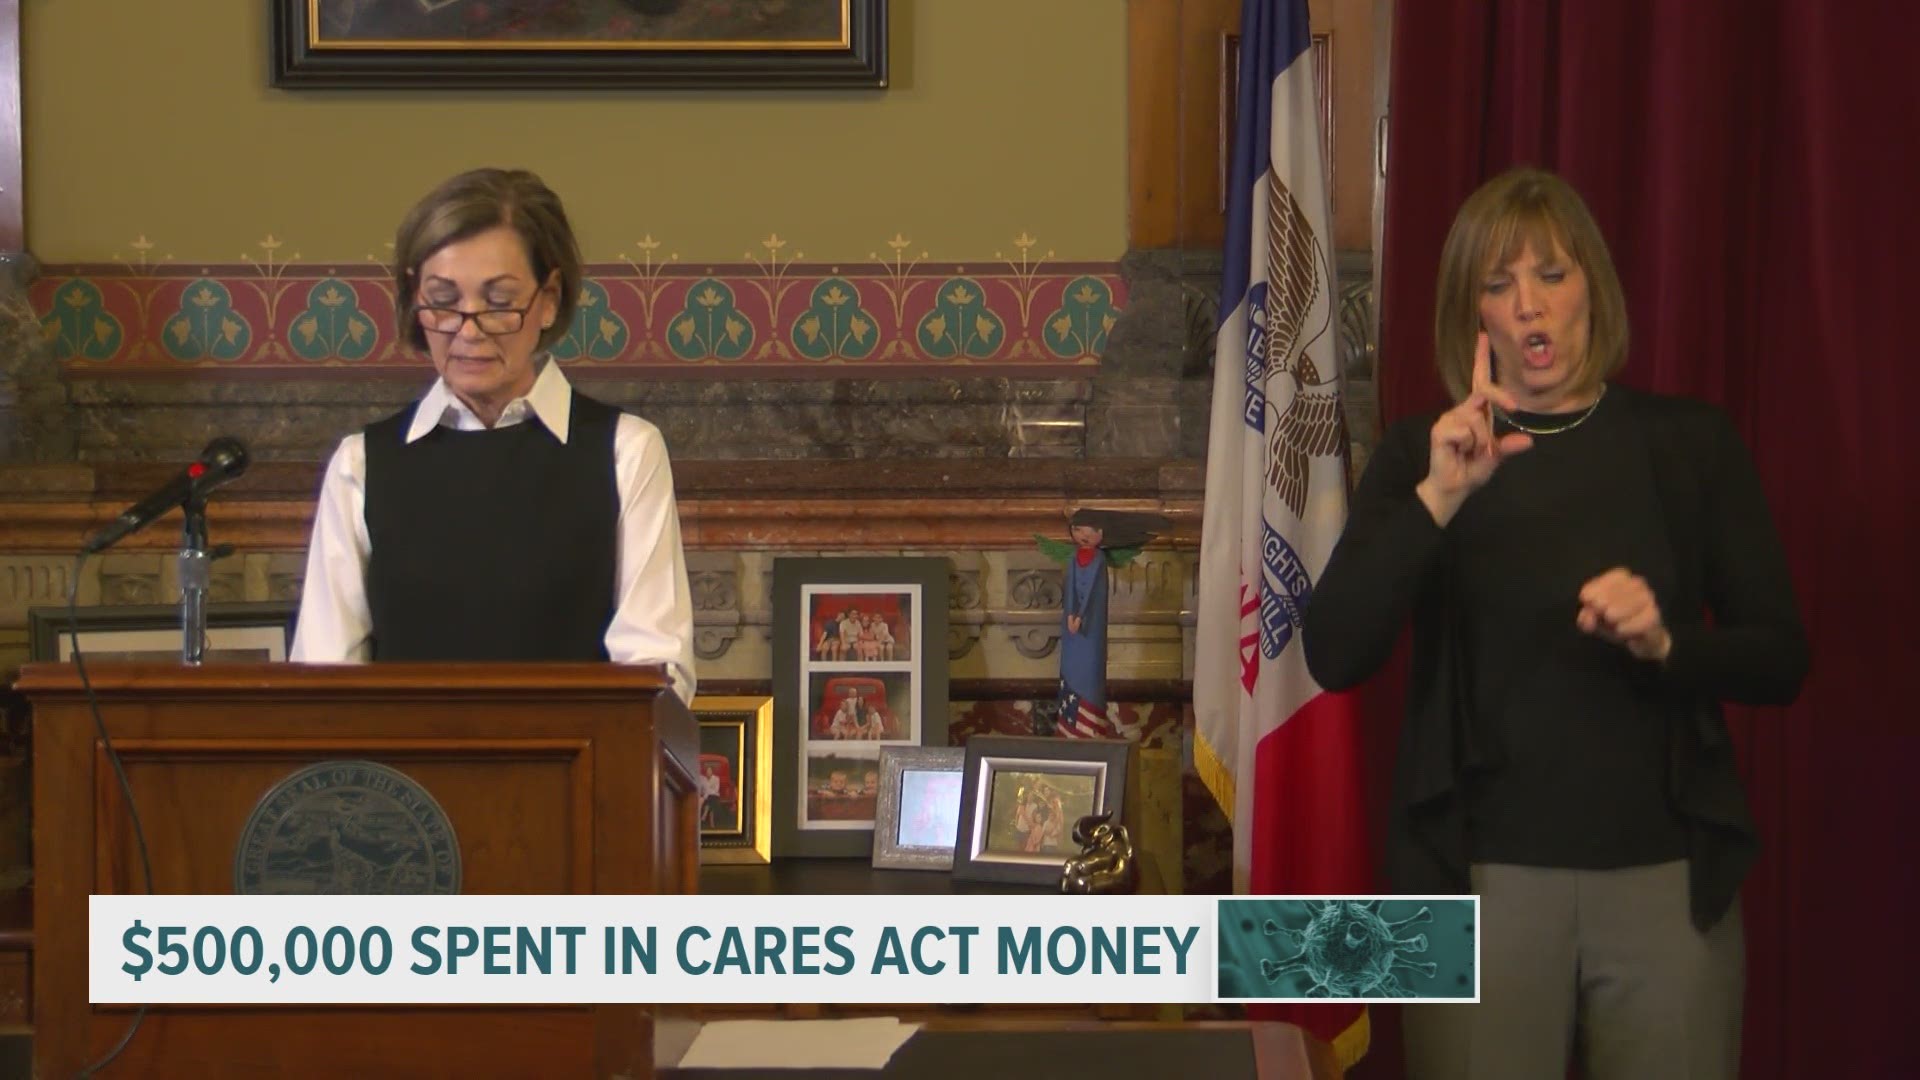 Designed to convince Iowans to do the right thing, the ad campaign will cost the state about $500,000 in CARES Act money.